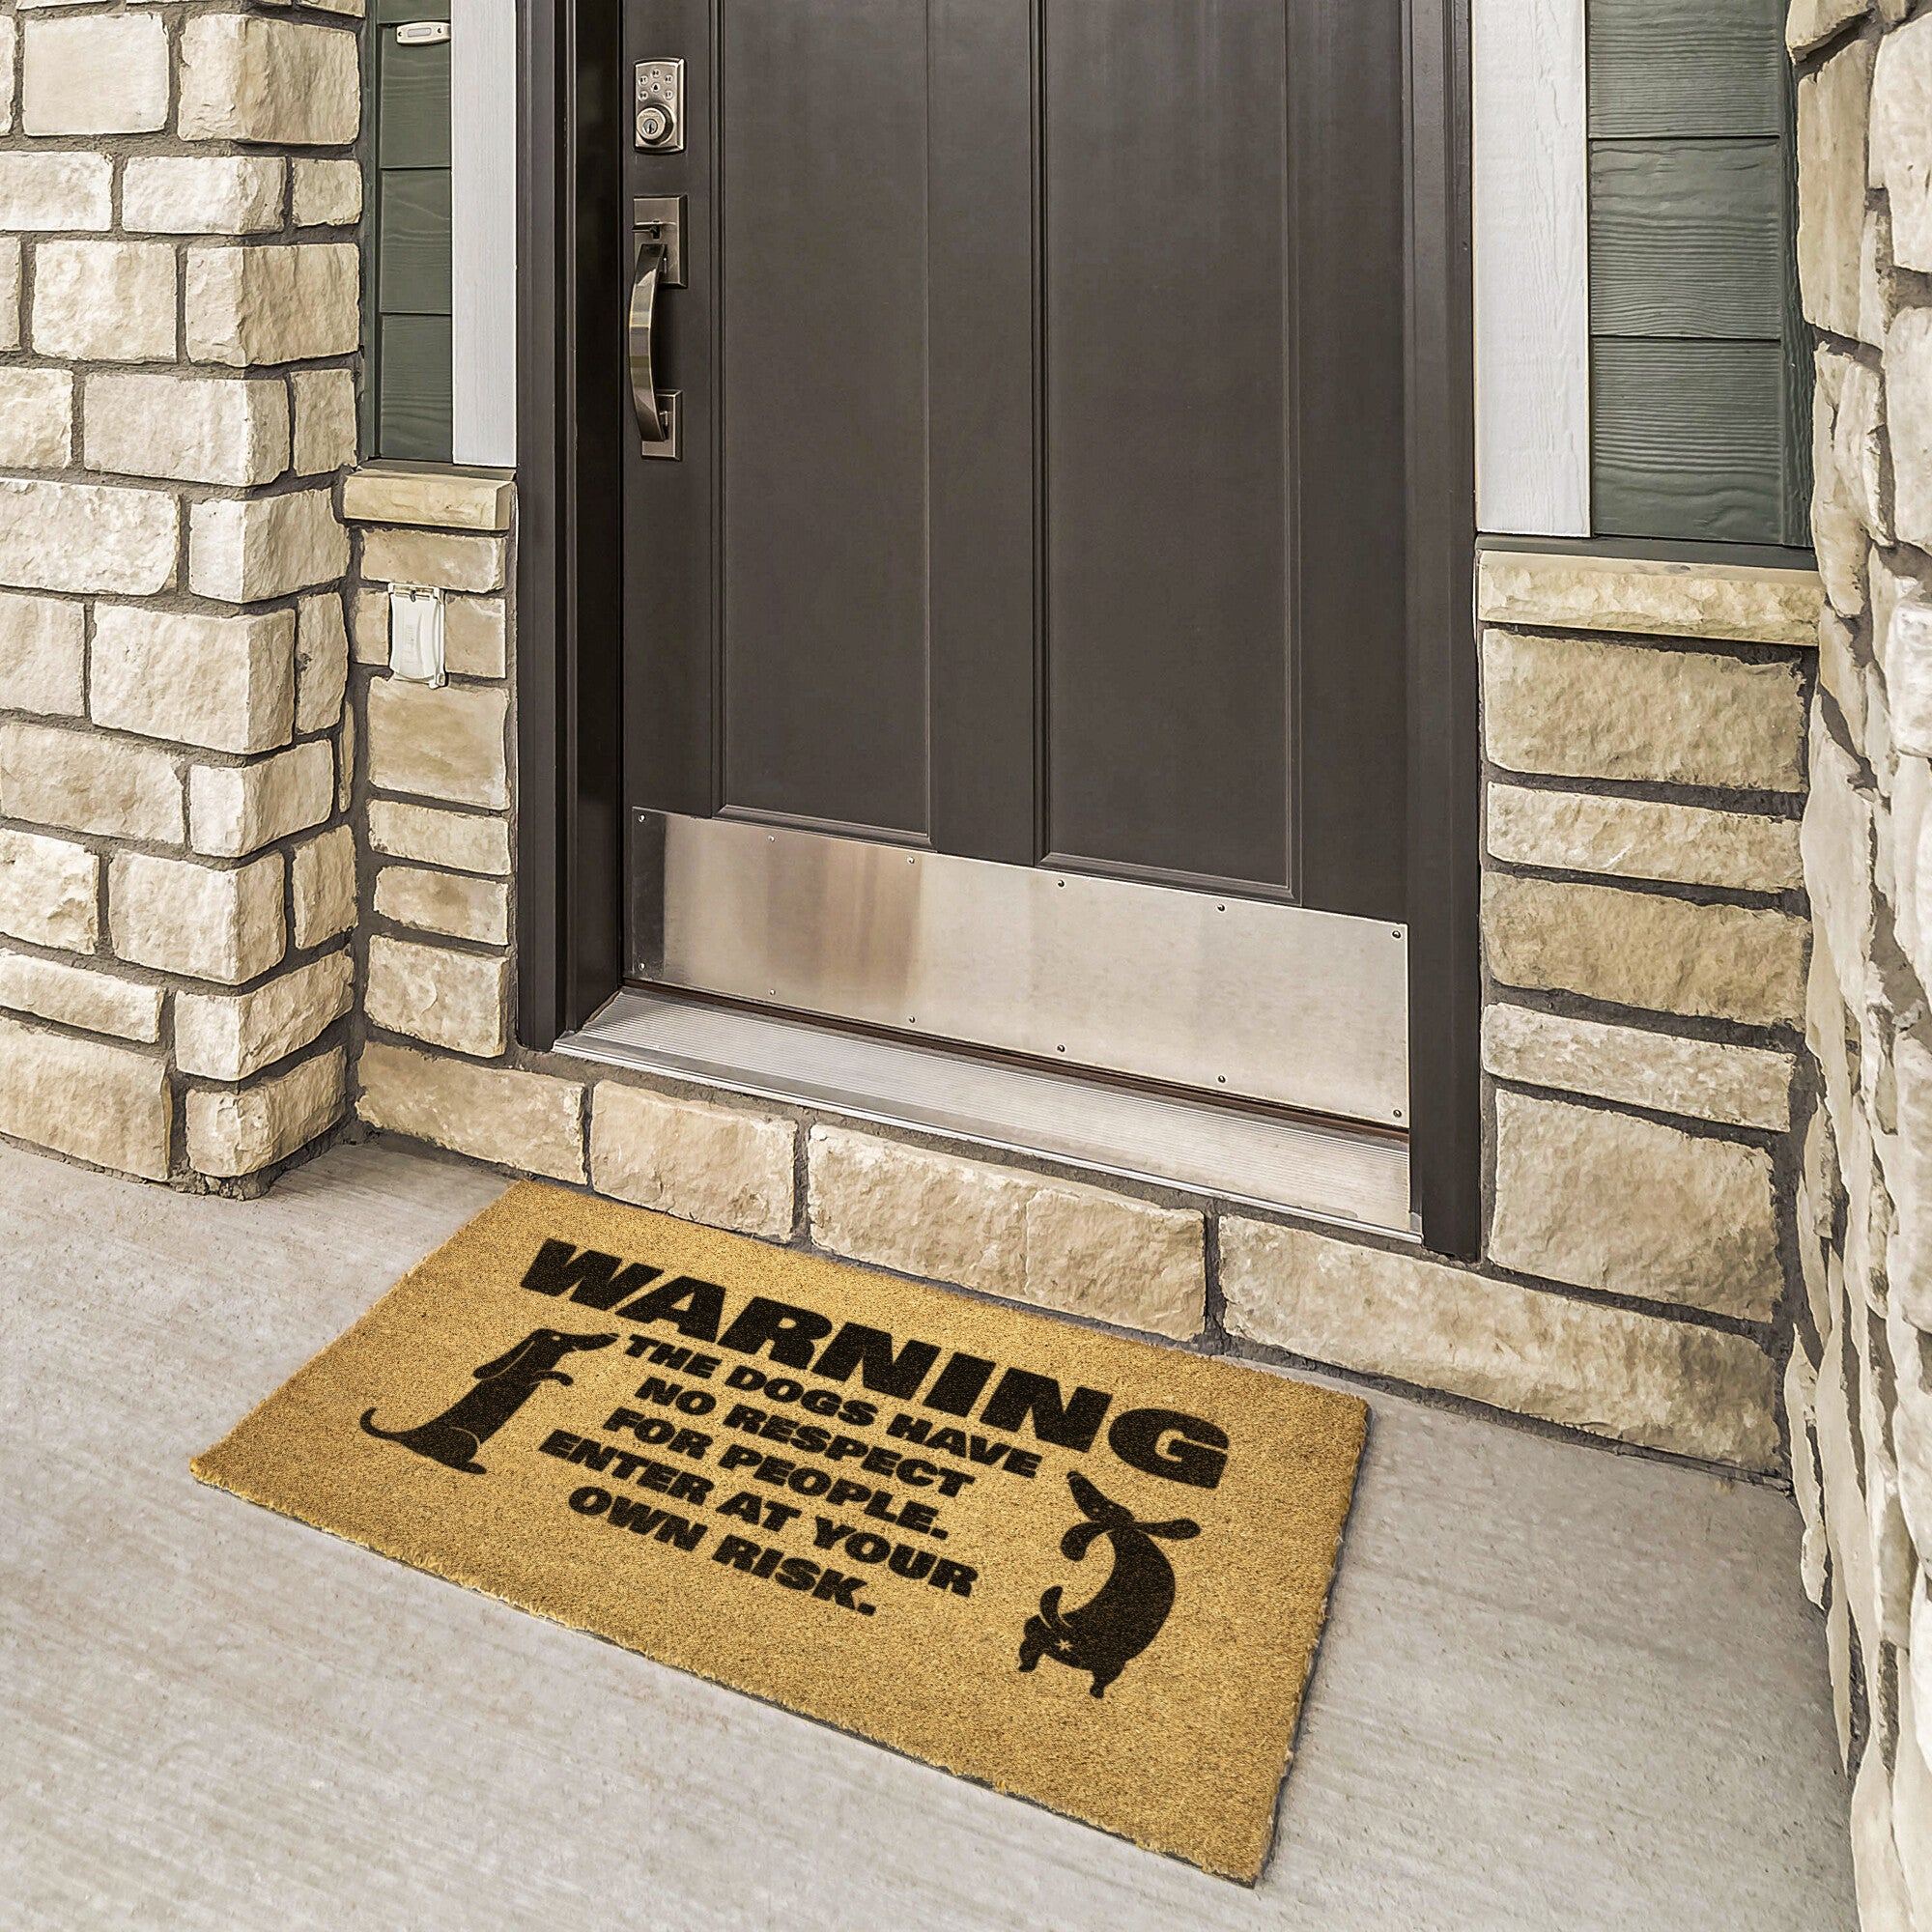 This house is Pit protected™ doormat safety love dog door mat